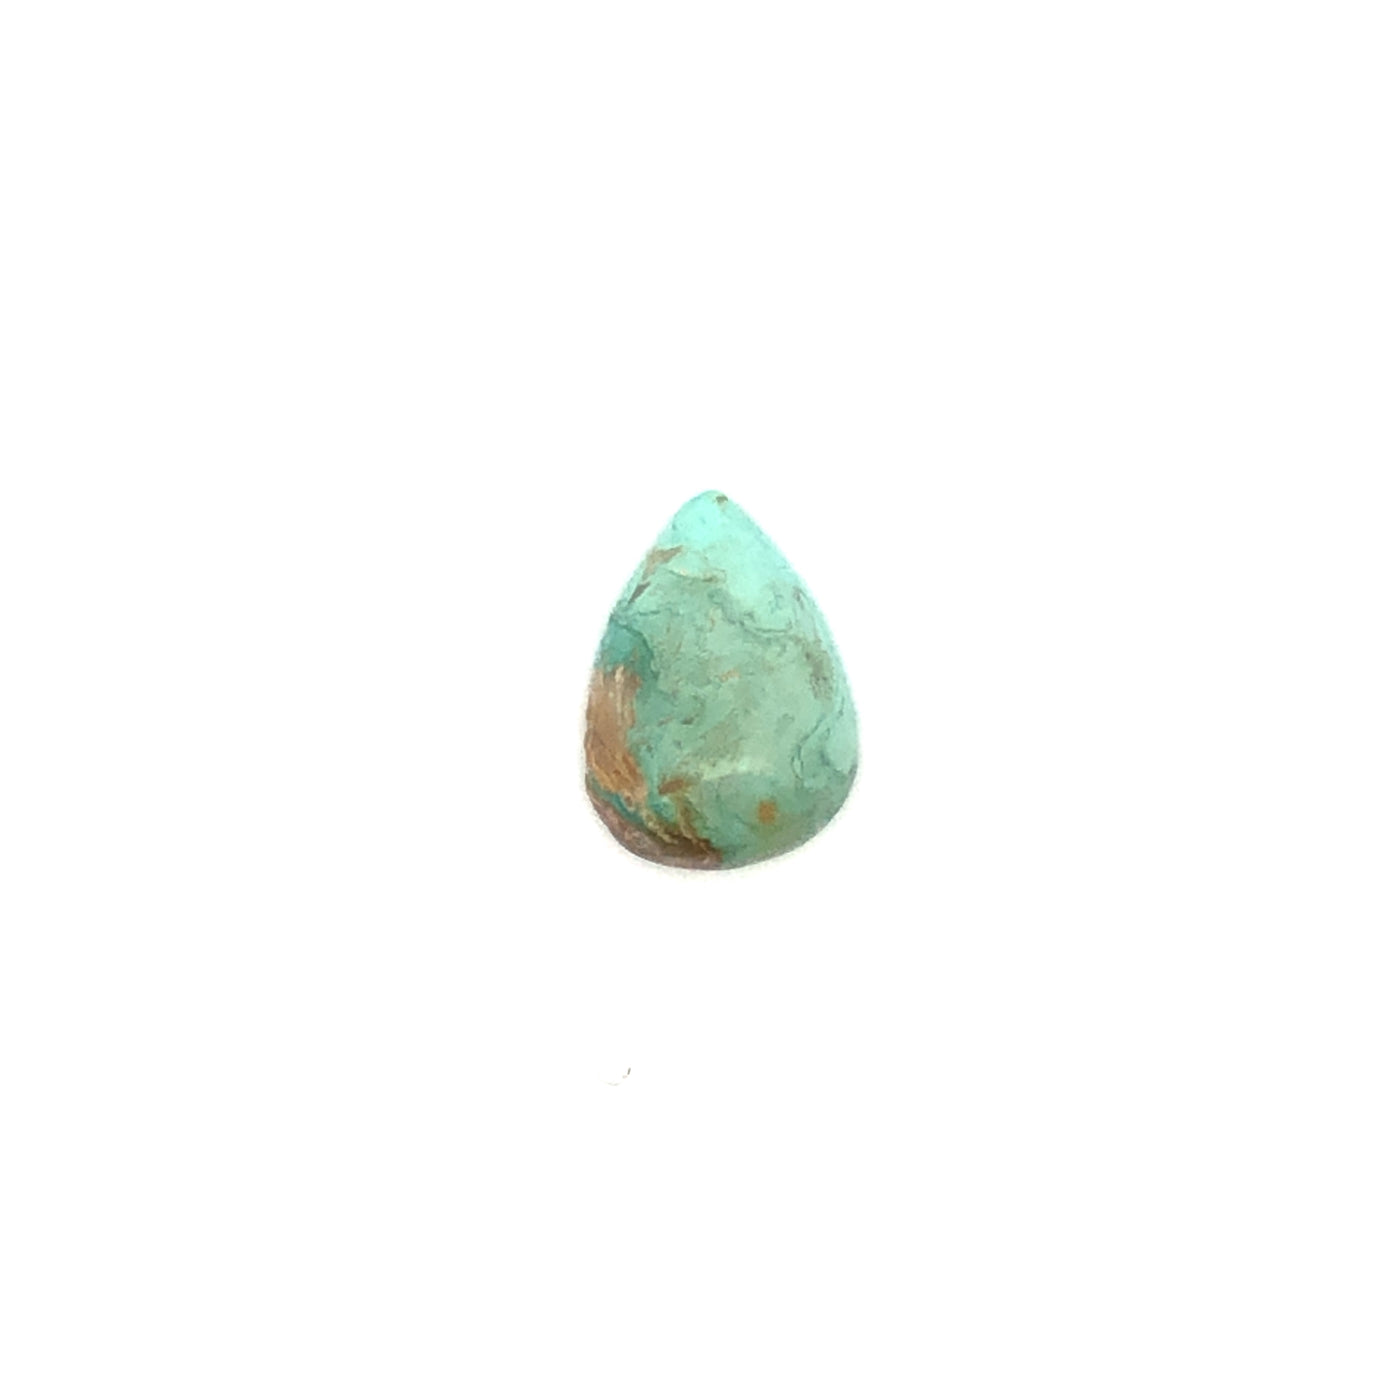 Loose Narooma Turquoise Pear Shaped 6.97Ct Blue With Some Brown